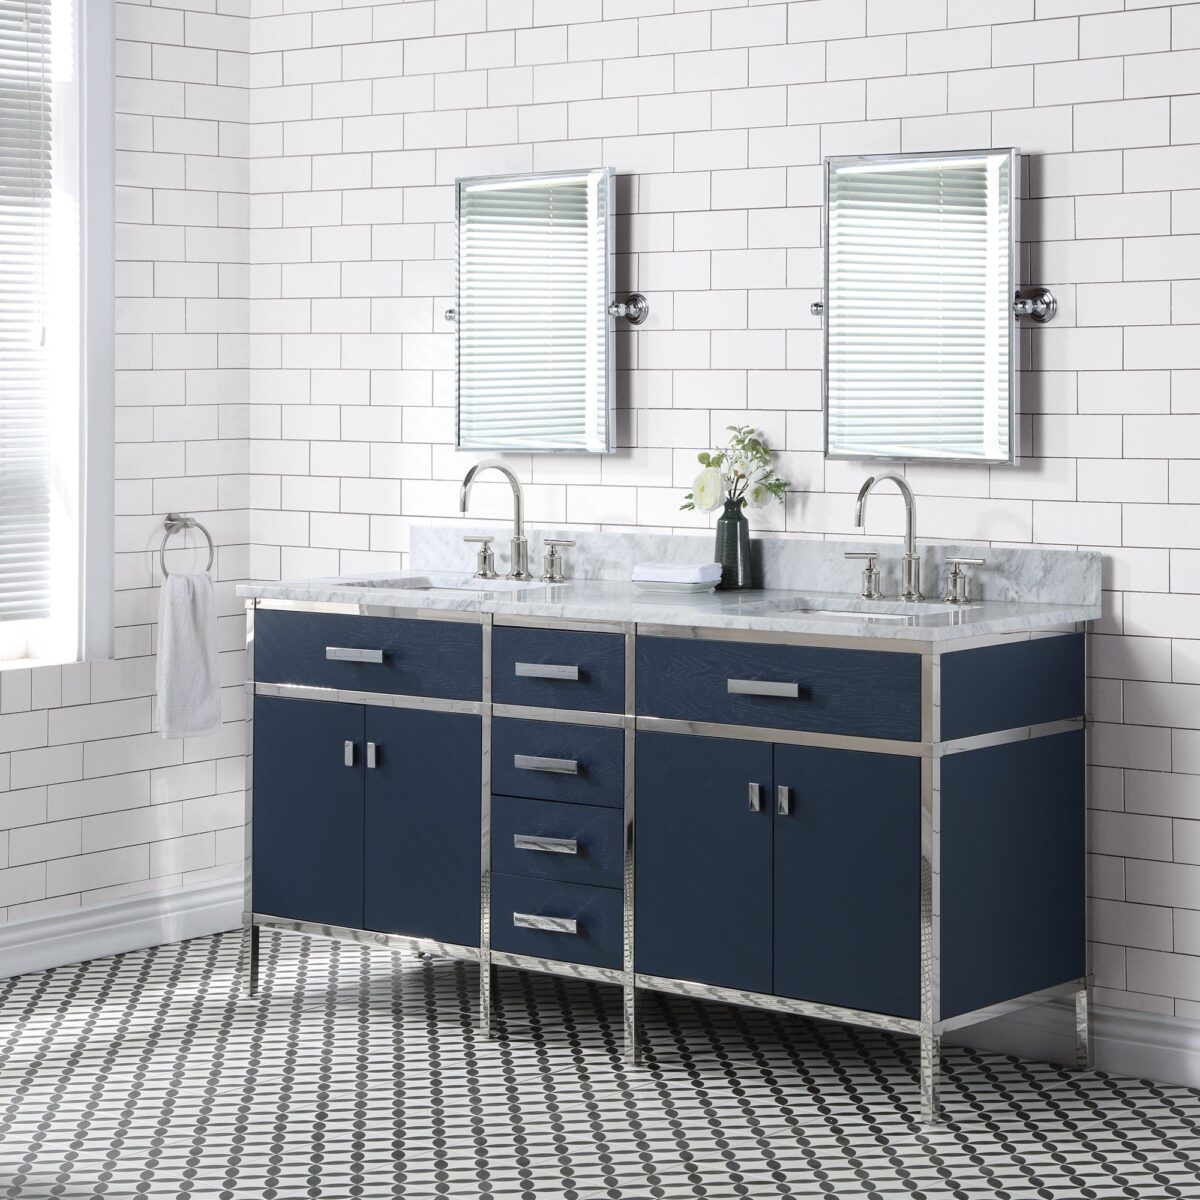 Daedalus Designs - Water Creation Marquis 72 In. Monarch Blue Double Sink Bathroom Vanity | Carrara White Marble Countertop | Chrome Finish - Review